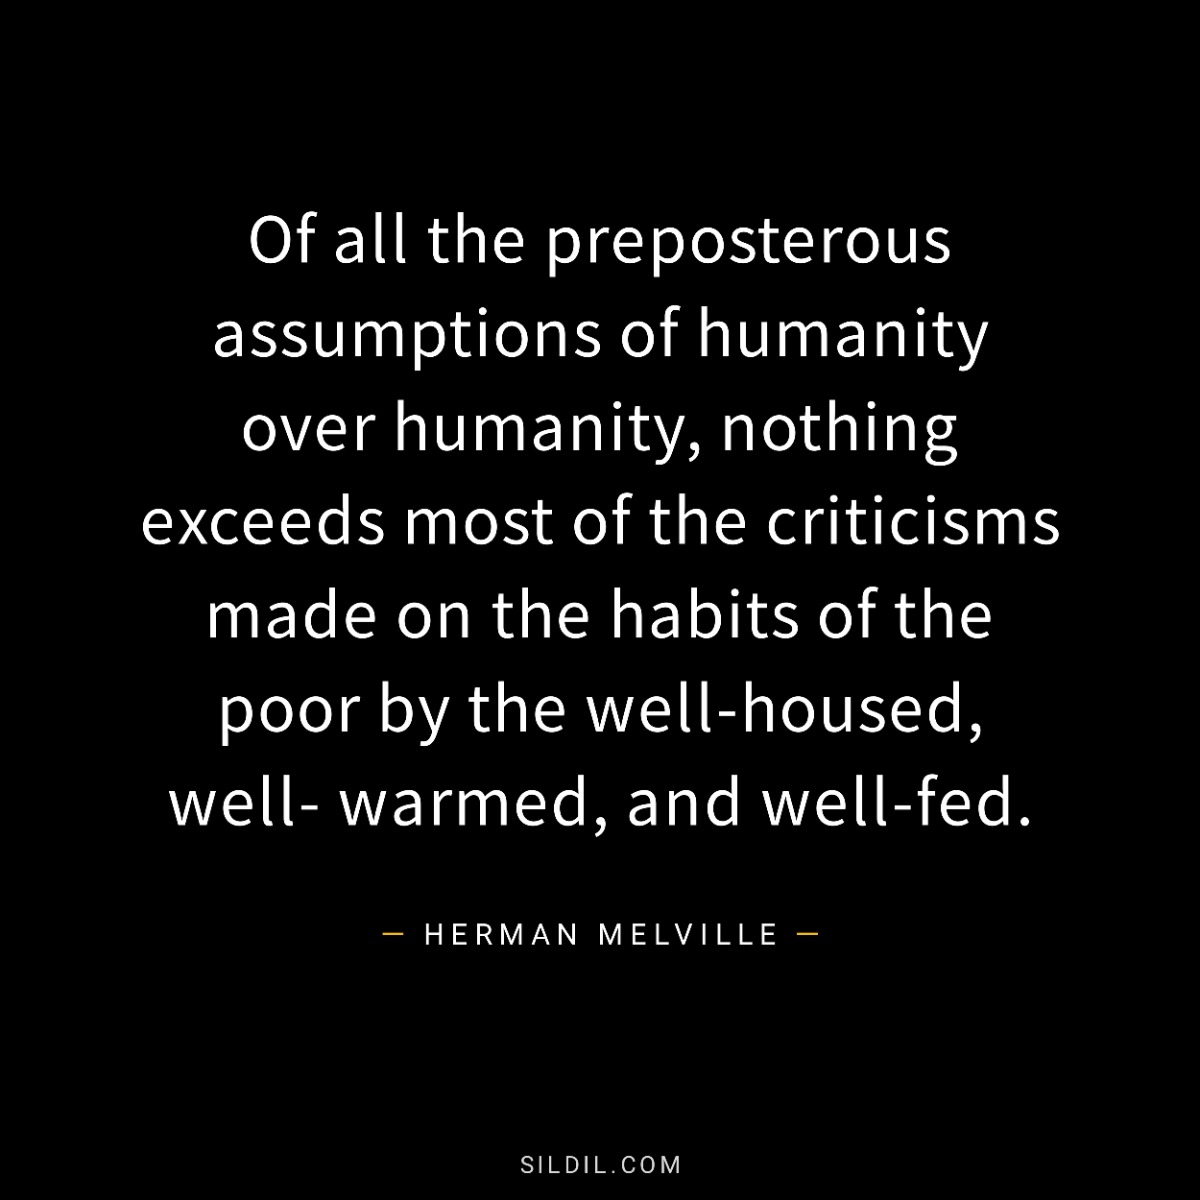 Of all the preposterous assumptions of humanity over humanity, nothing exceeds most of the criticisms made on the habits of the poor by the well-housed, well- warmed, and well-fed.